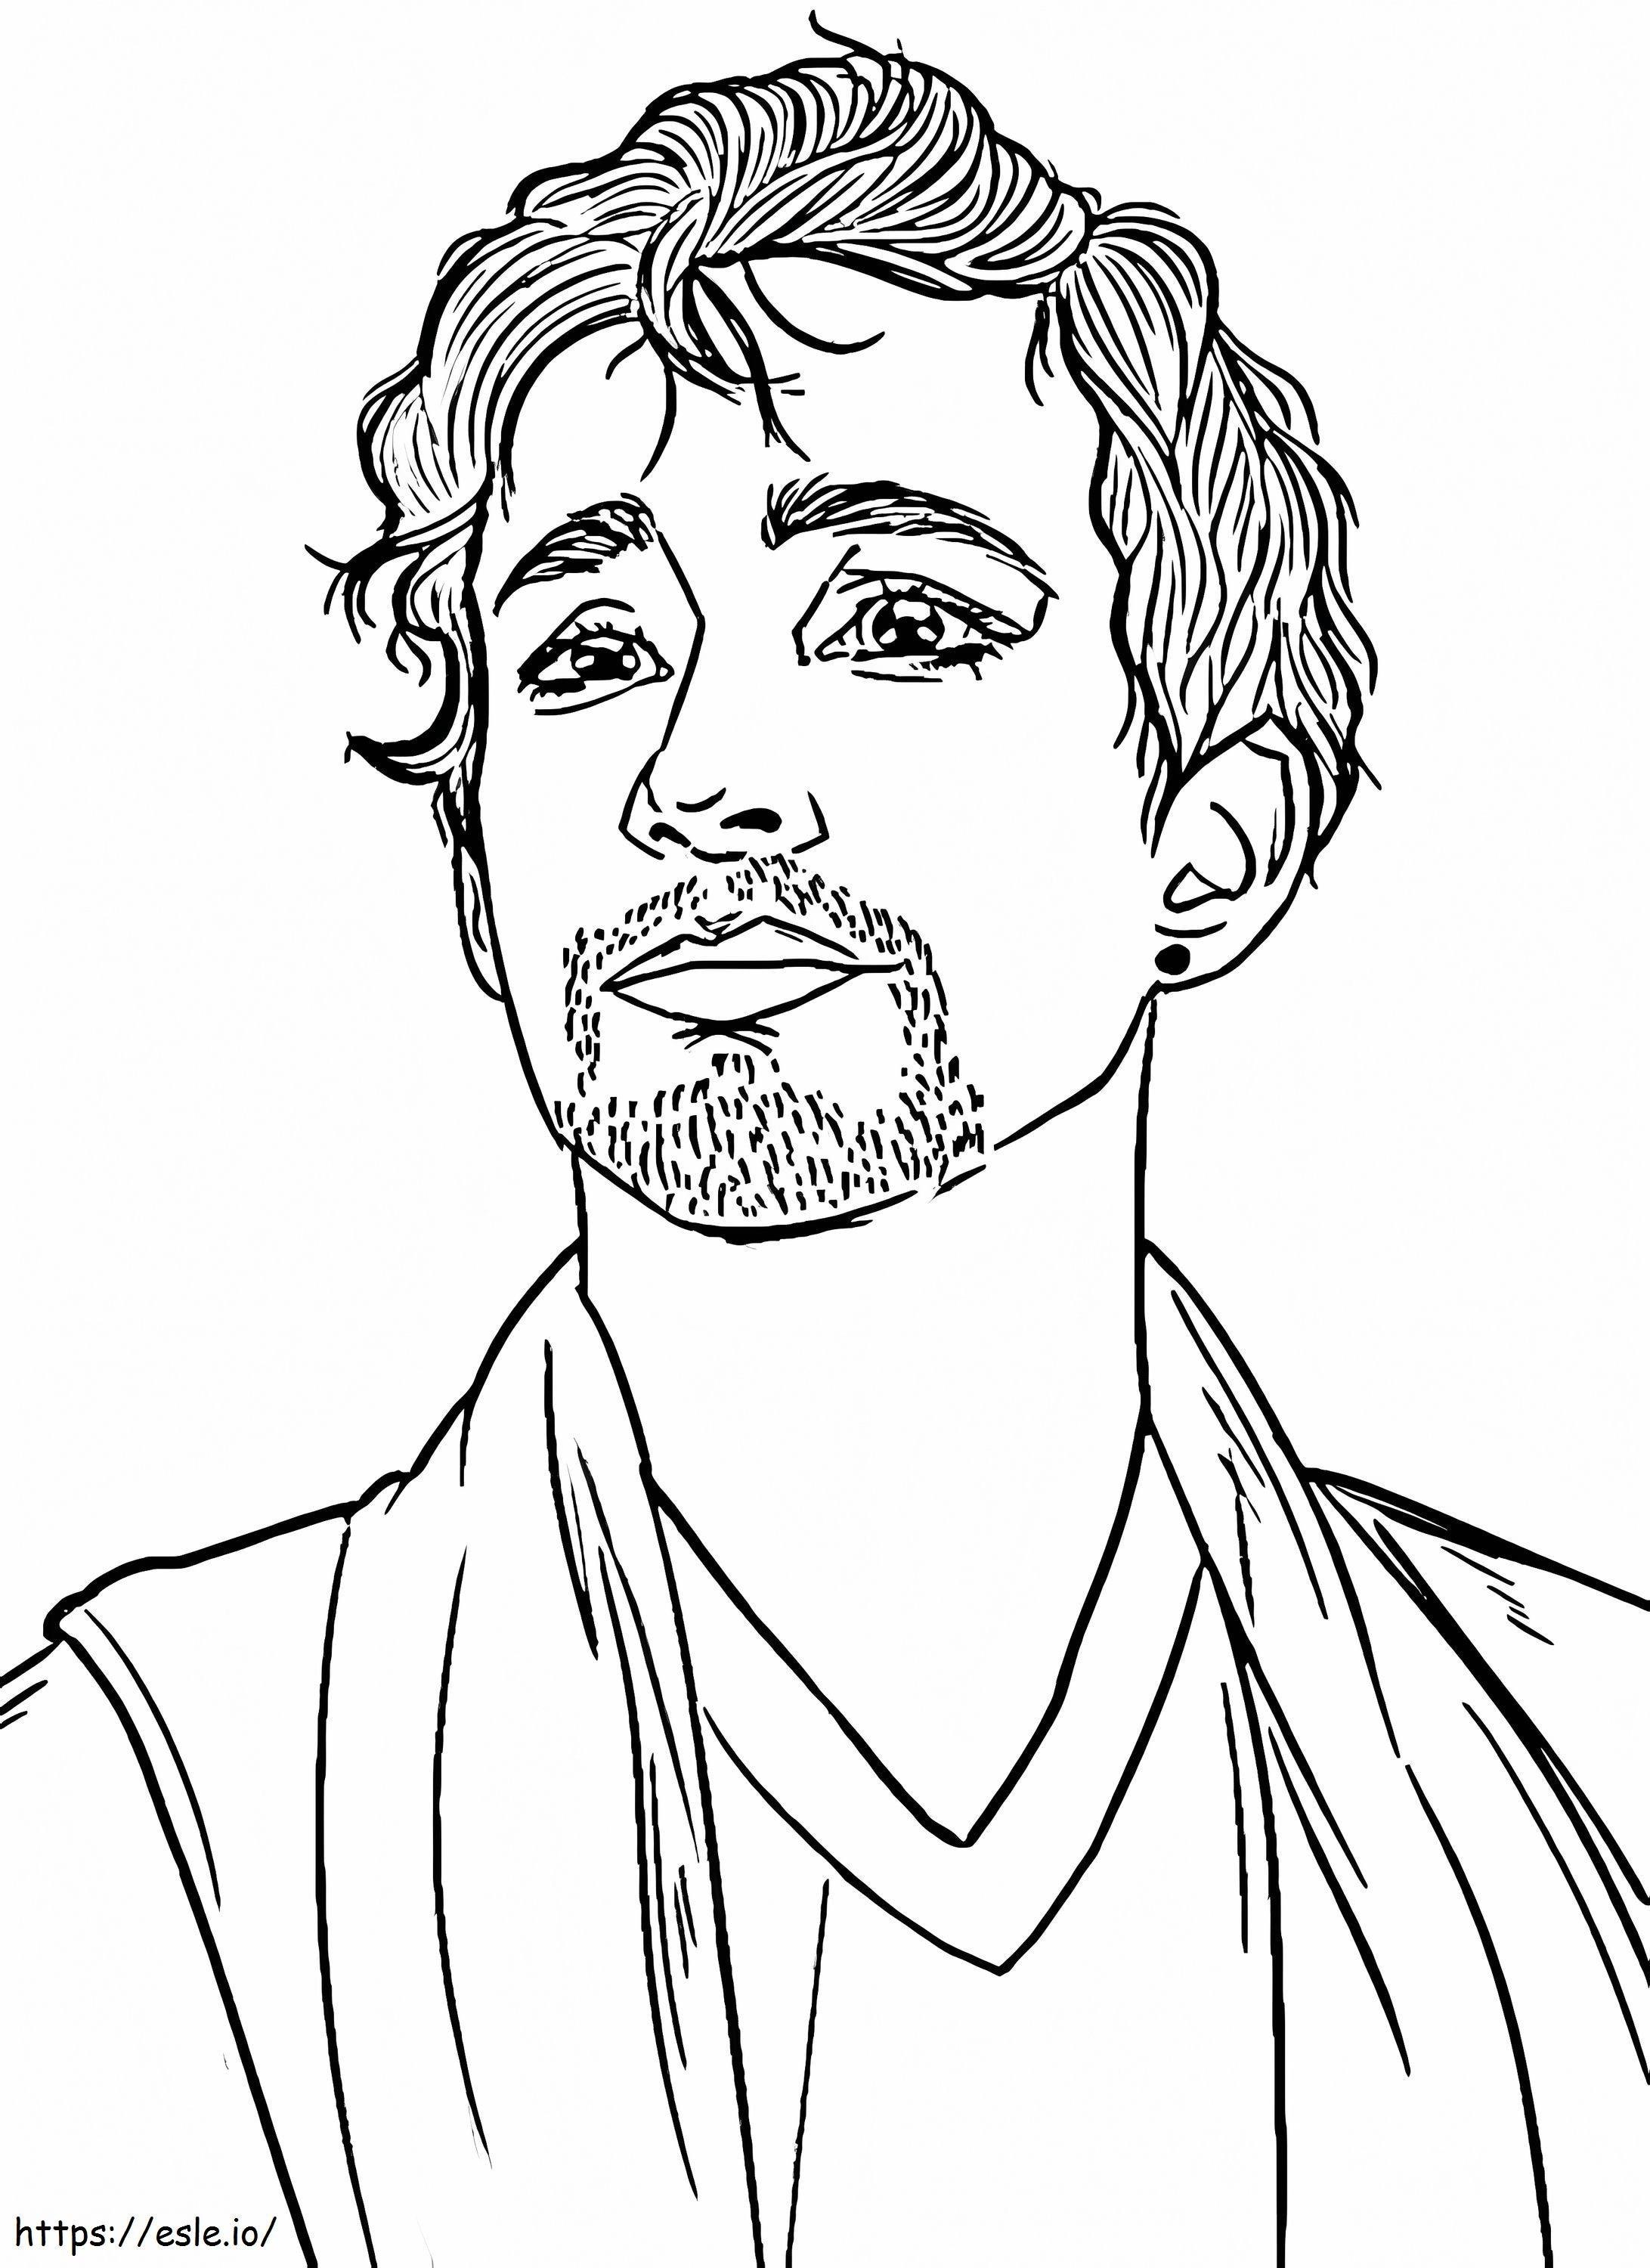 Klaus From Umbrella Academy coloring page